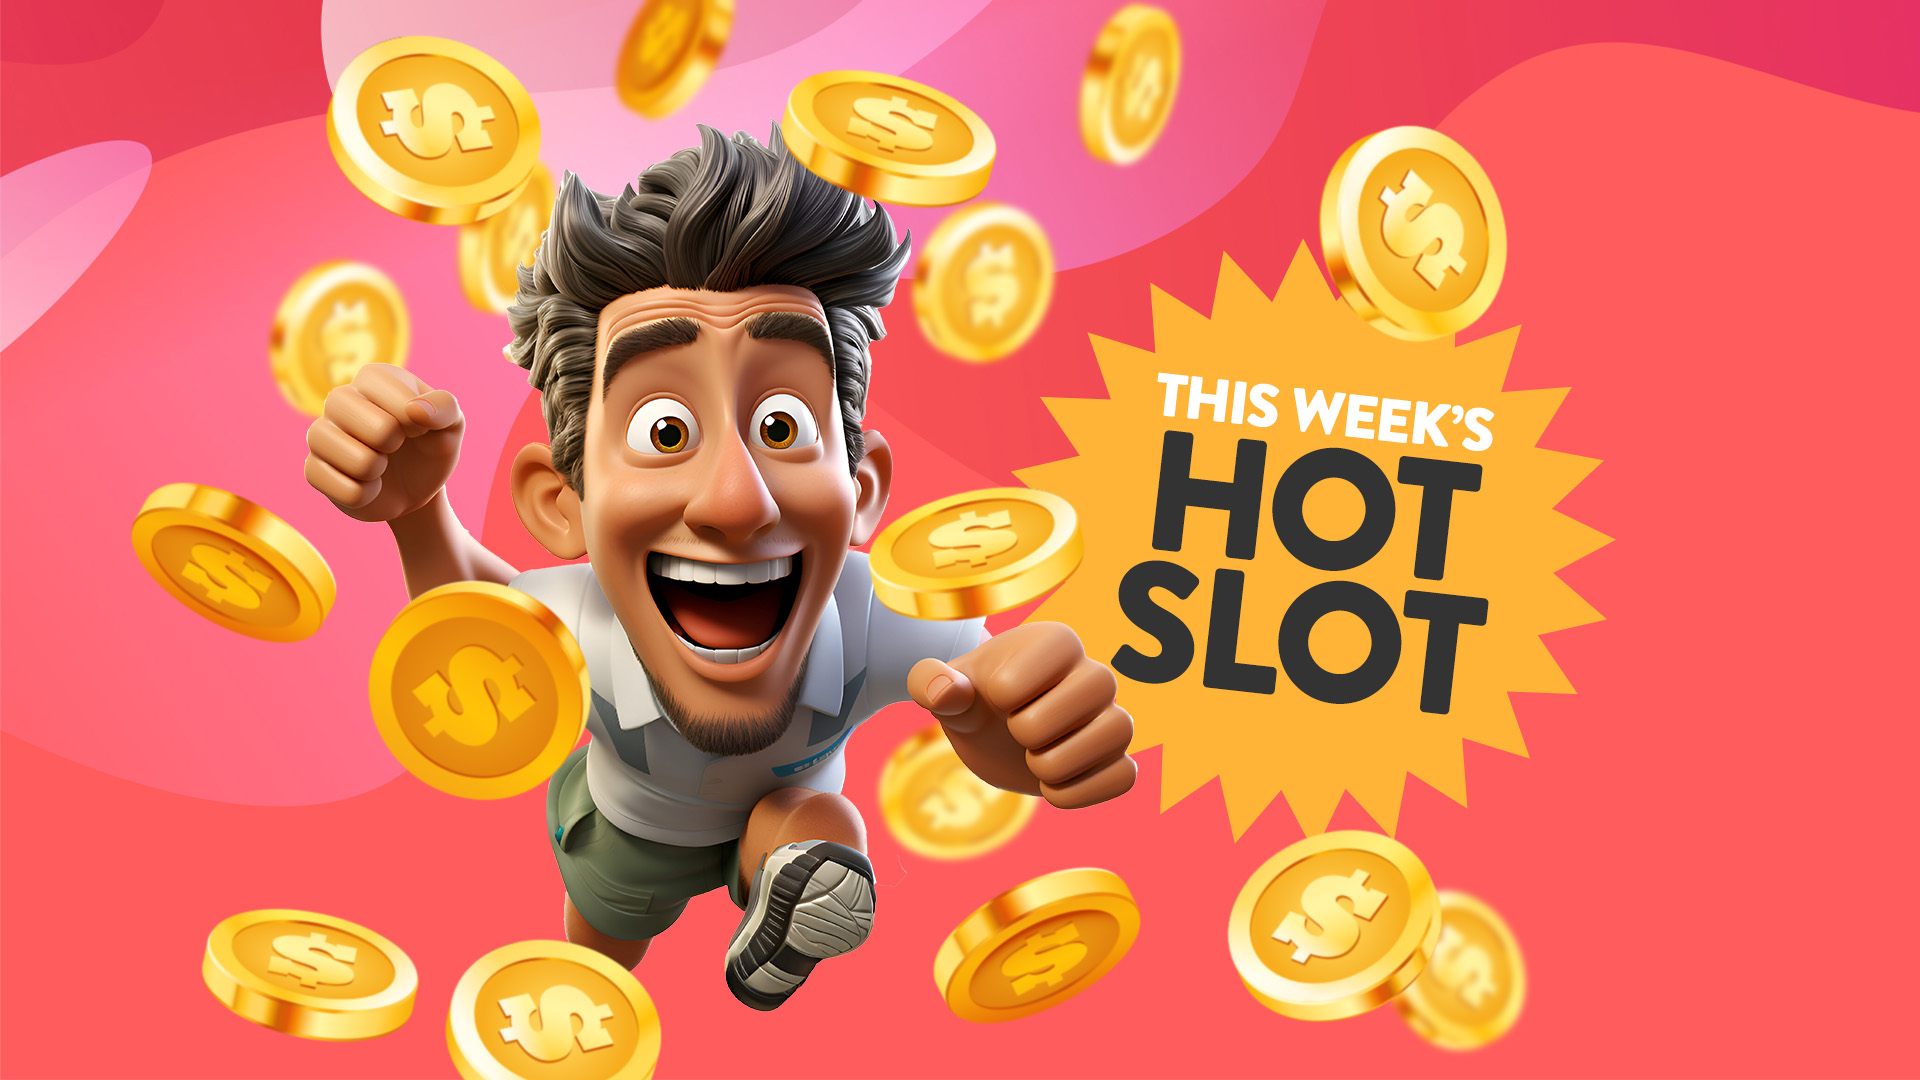 A very excited man charges forward through multiple gold coins with the text ‘This week’s hot slot’ written on the right and on a pink background.